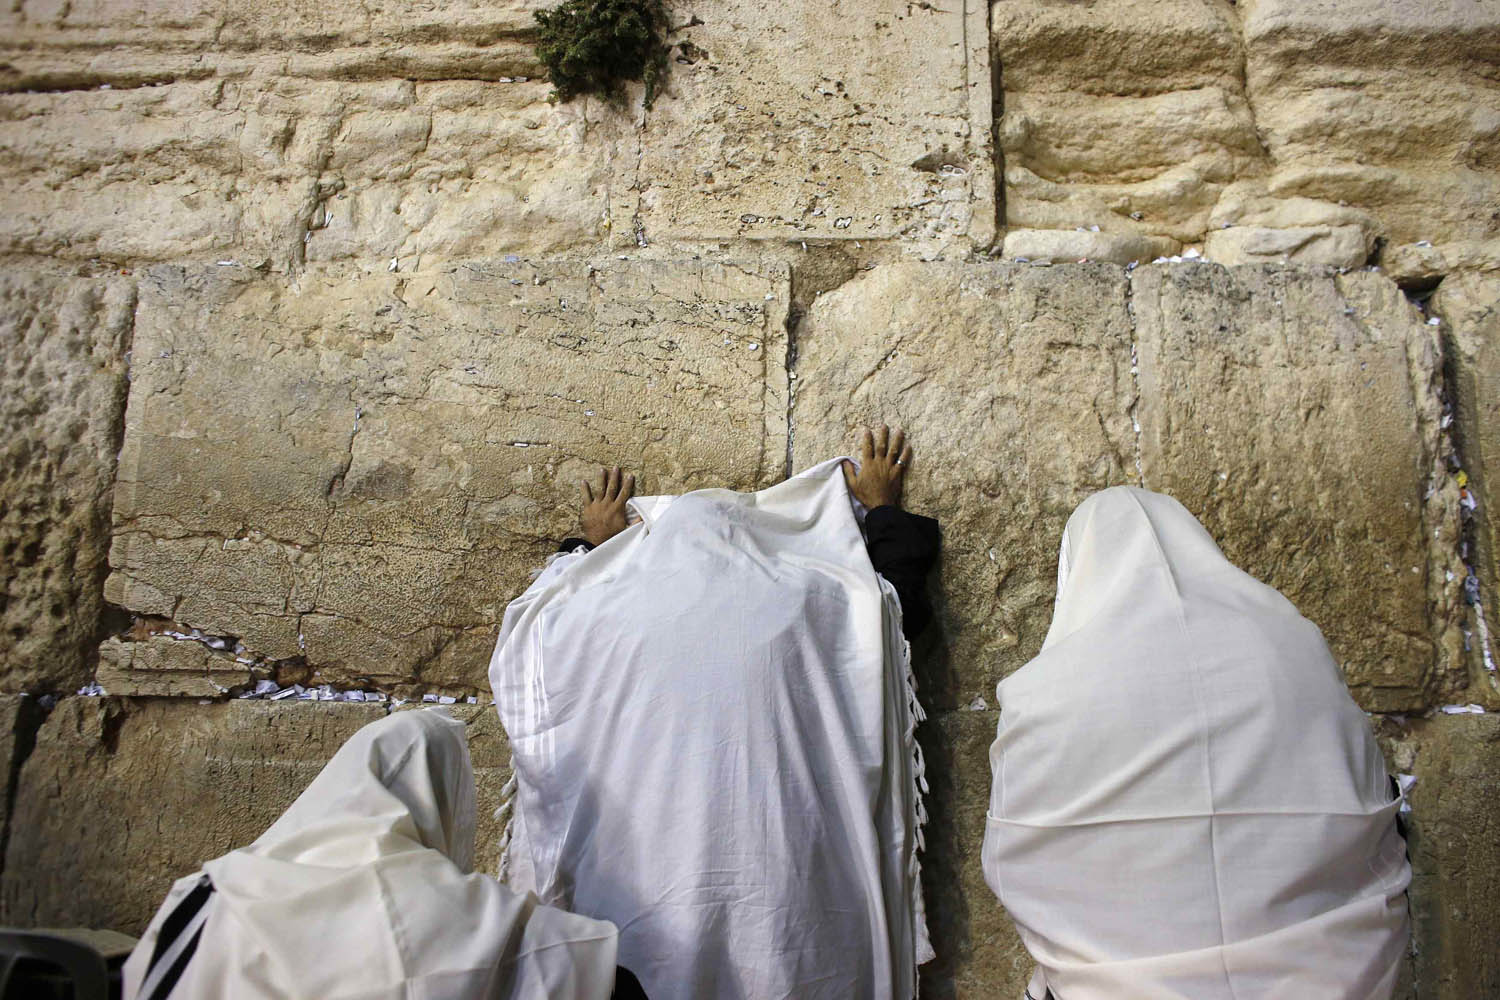 Jewish worshippers pray at the Western Wall in Jerusalem's Old City